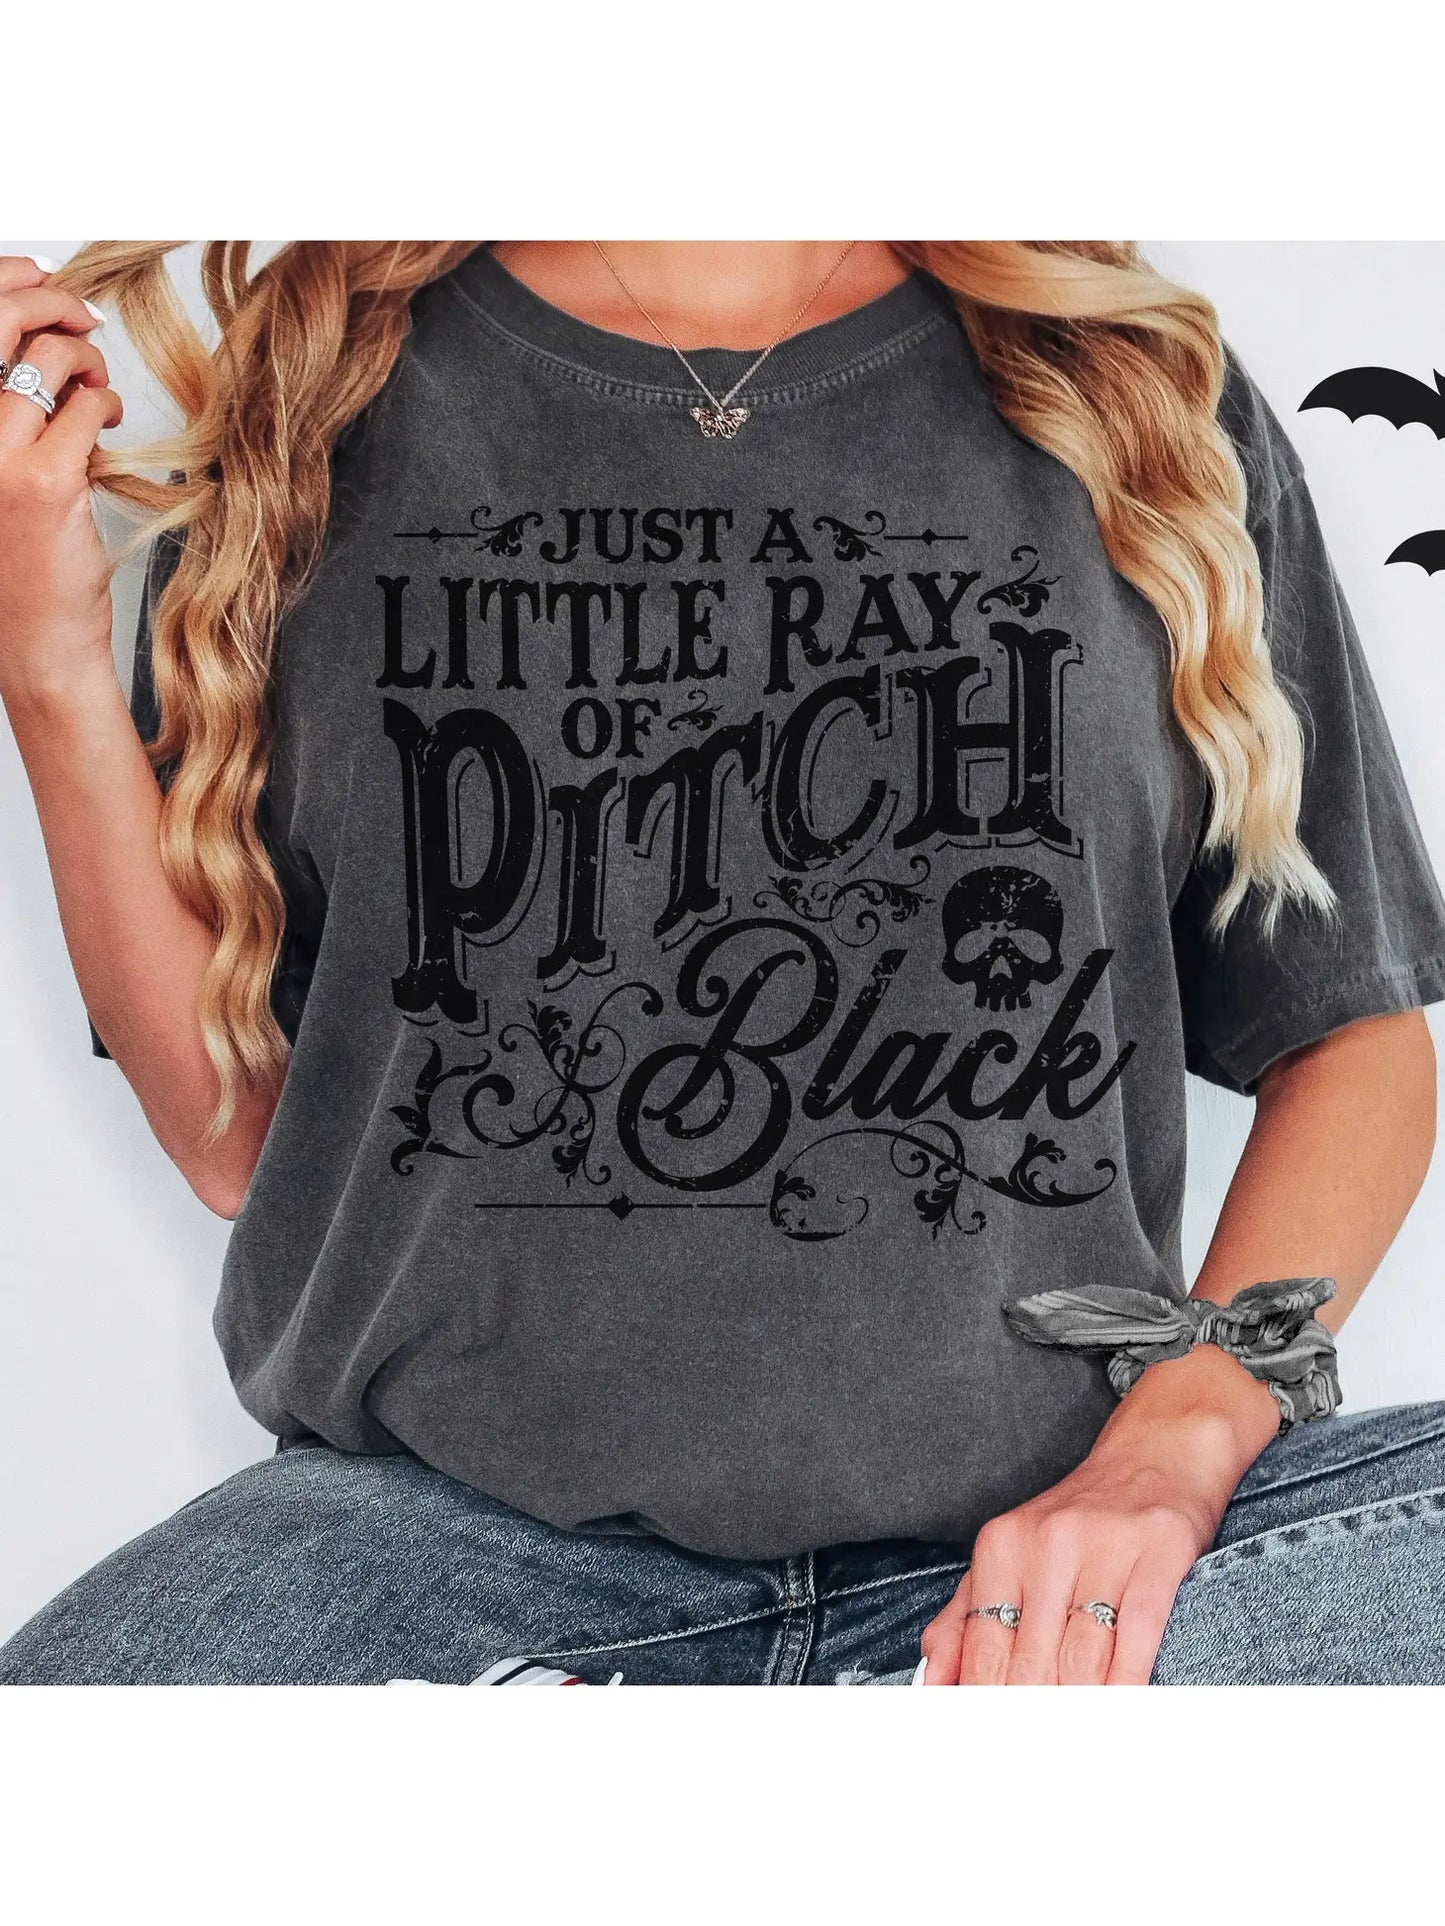 Load image into Gallery viewer, Just A Little Ray of Pitch Black Unisex Tee
